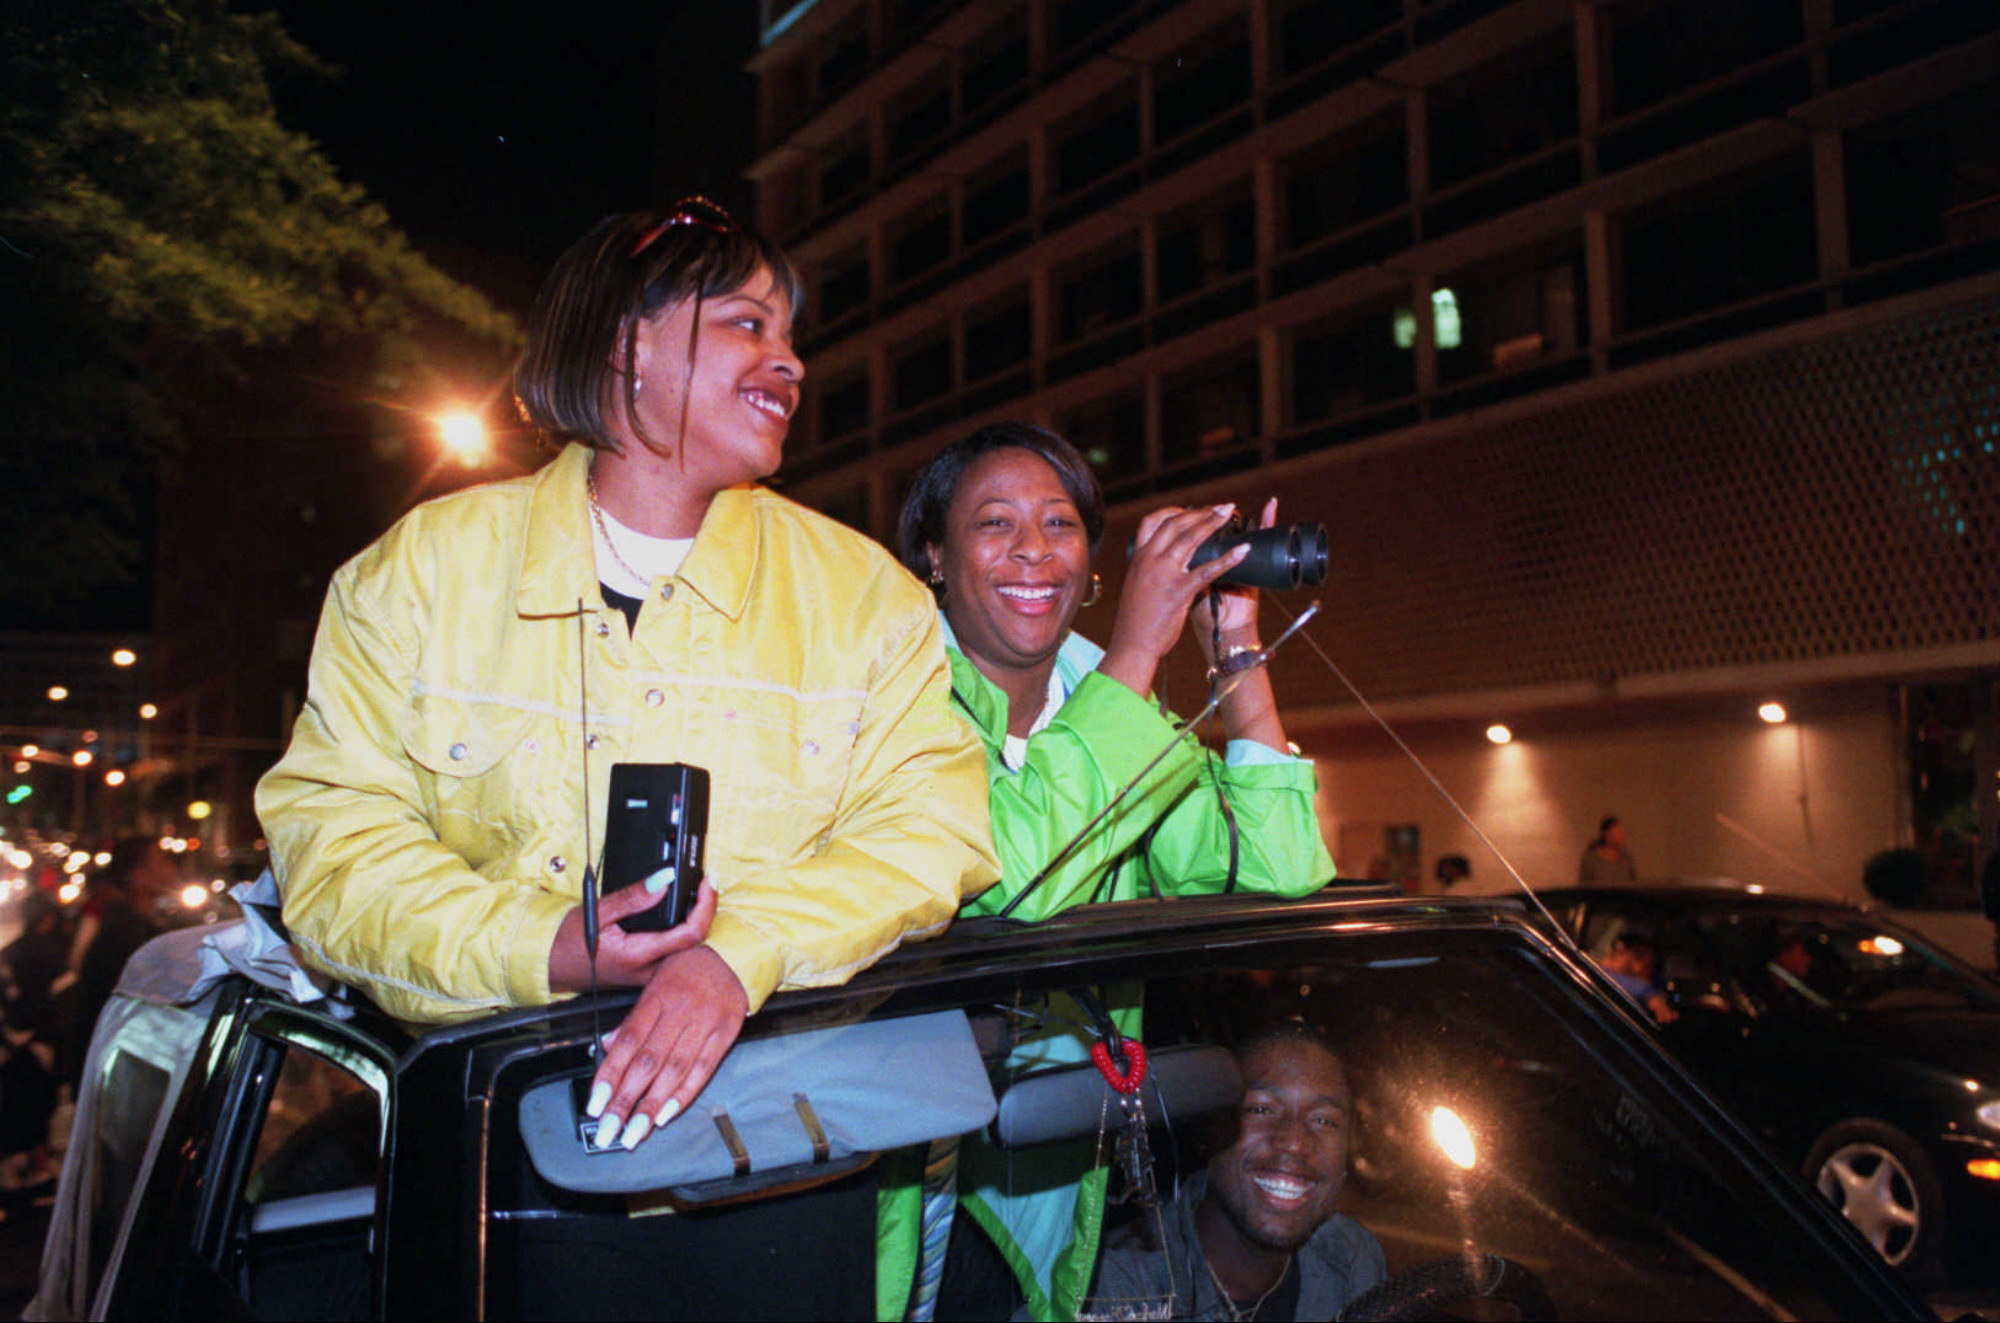 Two people with cameras poke their heads out of the sunroof of a car at night, smiling for the camera